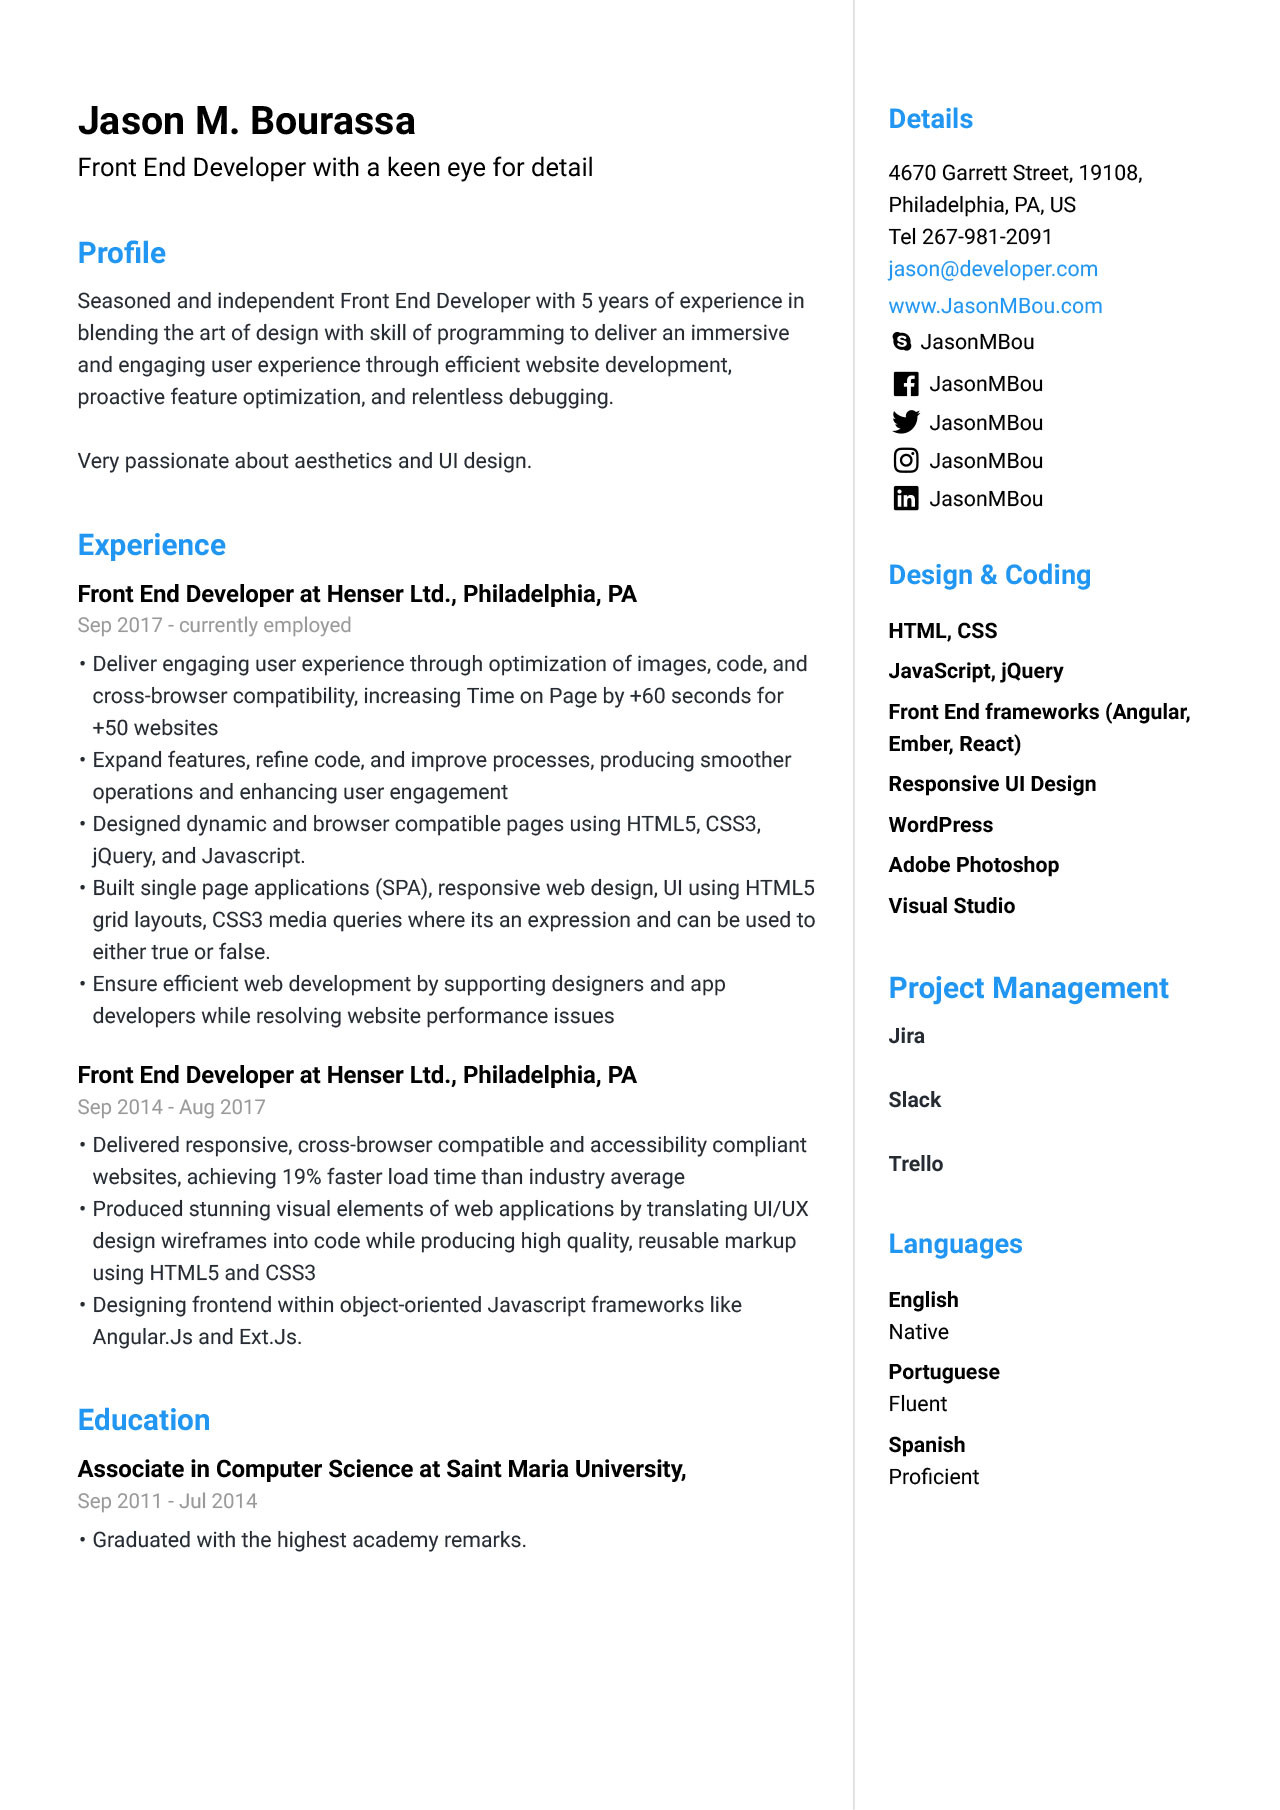 Sample Resume for Ui Developer with 5 Years Front End Developer Resume [guide & Examples] – Jofibo